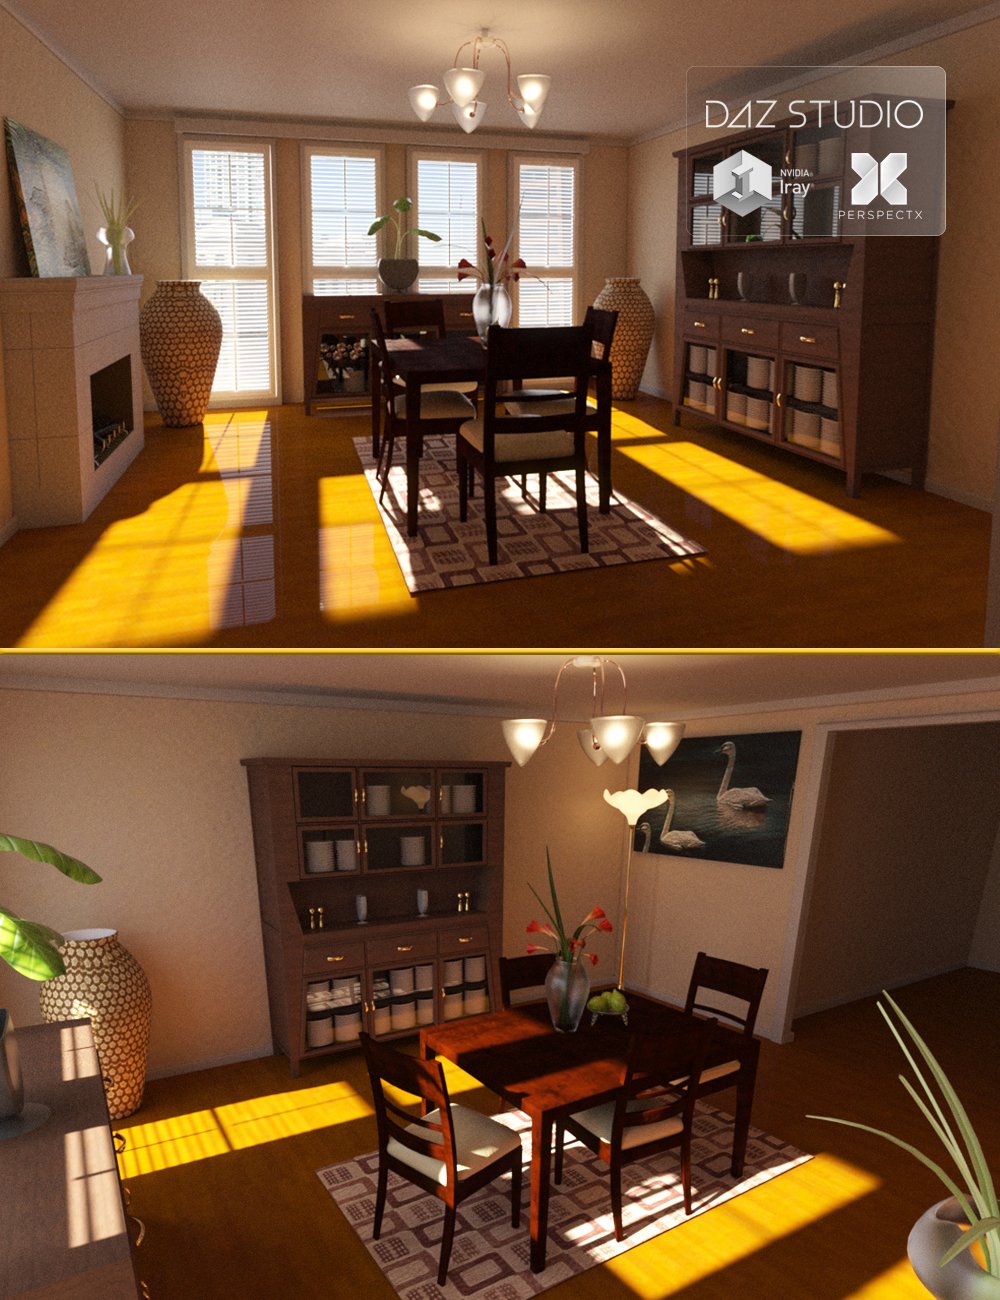 City Dining Room by: PerspectX, 3D Models by Daz 3D